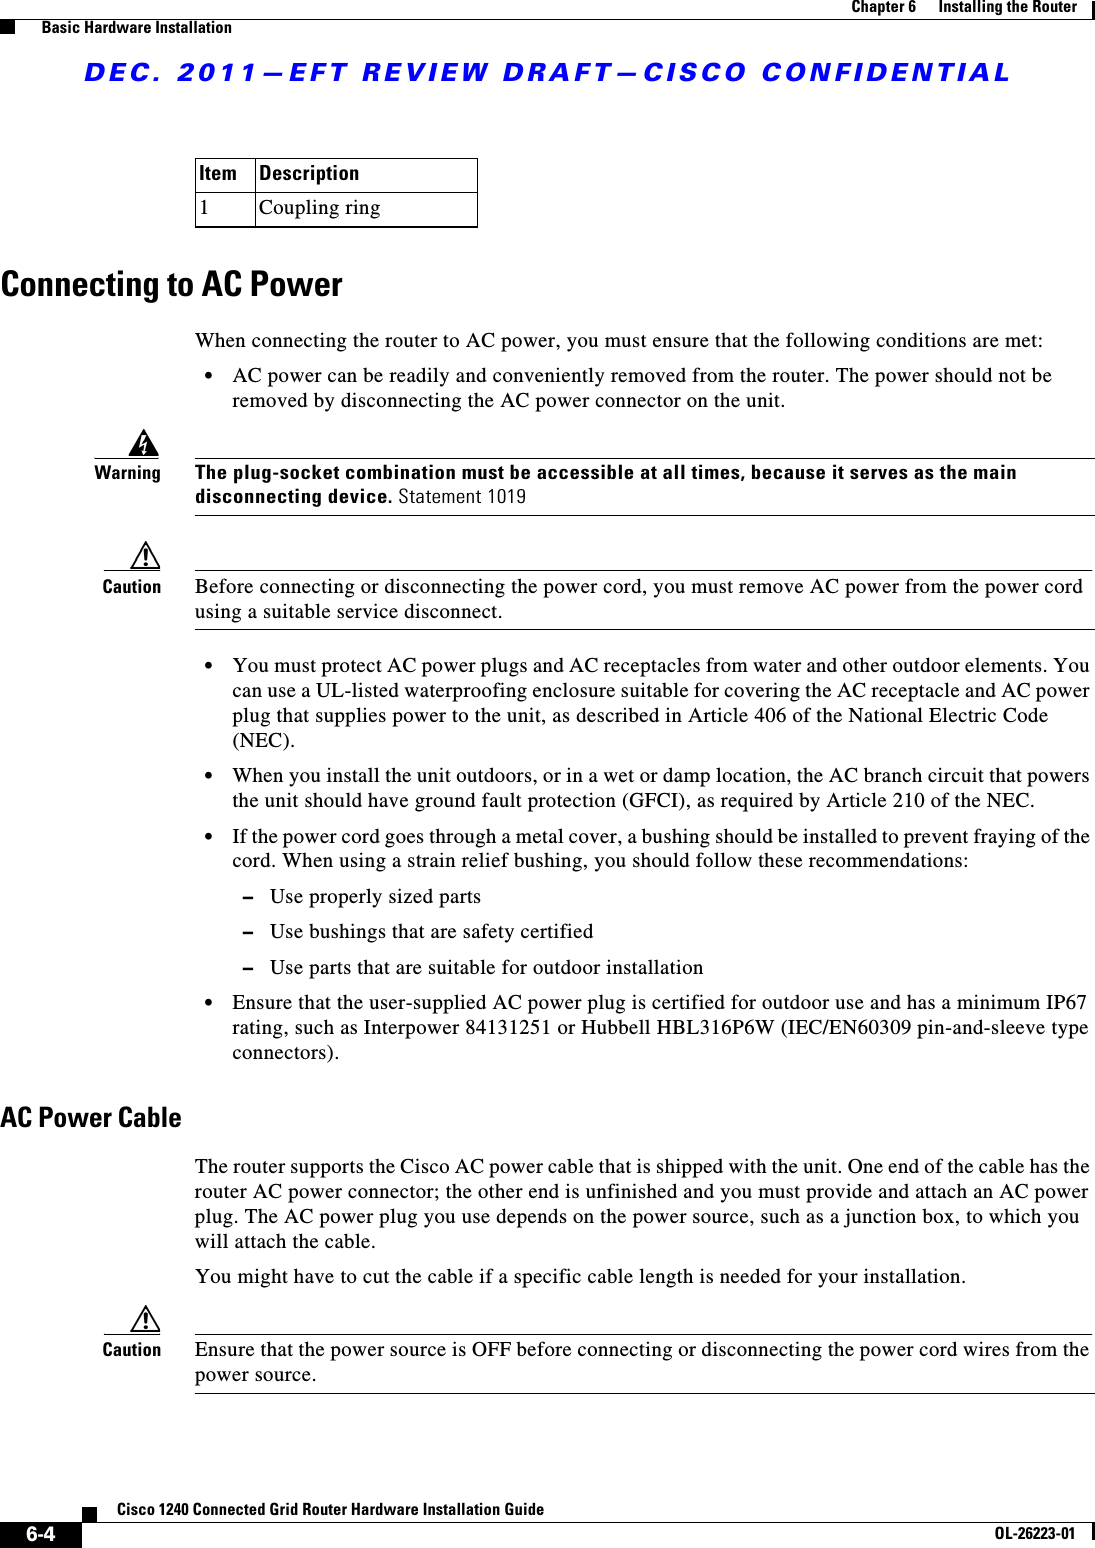 DEC. 2011—EFT REVIEW DRAFT—CISCO CONFIDENTIAL6-4Cisco 1240 Connected Grid Router Hardware Installation GuideOL-26223-01Chapter 6      Installing the Router  Basic Hardware InstallationConnecting to AC PowerWhen connecting the router to AC power, you must ensure that the following conditions are met:  • AC power can be readily and conveniently removed from the router. The power should not be removed by disconnecting the AC power connector on the unit. WarningThe plug-socket combination must be accessible at all times, because it serves as the main disconnecting device. Statement 1019Caution Before connecting or disconnecting the power cord, you must remove AC power from the power cord using a suitable service disconnect.  • You must protect AC power plugs and AC receptacles from water and other outdoor elements. You can use a UL-listed waterproofing enclosure suitable for covering the AC receptacle and AC power plug that supplies power to the unit, as described in Article 406 of the National Electric Code (NEC).  • When you install the unit outdoors, or in a wet or damp location, the AC branch circuit that powers the unit should have ground fault protection (GFCI), as required by Article 210 of the NEC.  • If the power cord goes through a metal cover, a bushing should be installed to prevent fraying of the cord. When using a strain relief bushing, you should follow these recommendations:  –Use properly sized parts  –Use bushings that are safety certified  –Use parts that are suitable for outdoor installation  • Ensure that the user-supplied AC power plug is certified for outdoor use and has a minimum IP67 rating, such as Interpower 84131251 or Hubbell HBL316P6W (IEC/EN60309 pin-and-sleeve type connectors).AC Power CableThe router supports the Cisco AC power cable that is shipped with the unit. One end of the cable has the router AC power connector; the other end is unfinished and you must provide and attach an AC power plug. The AC power plug you use depends on the power source, such as a junction box, to which you will attach the cable. You might have to cut the cable if a specific cable length is needed for your installation.Caution Ensure that the power source is OFF before connecting or disconnecting the power cord wires from the power source.Item Description1Coupling ring